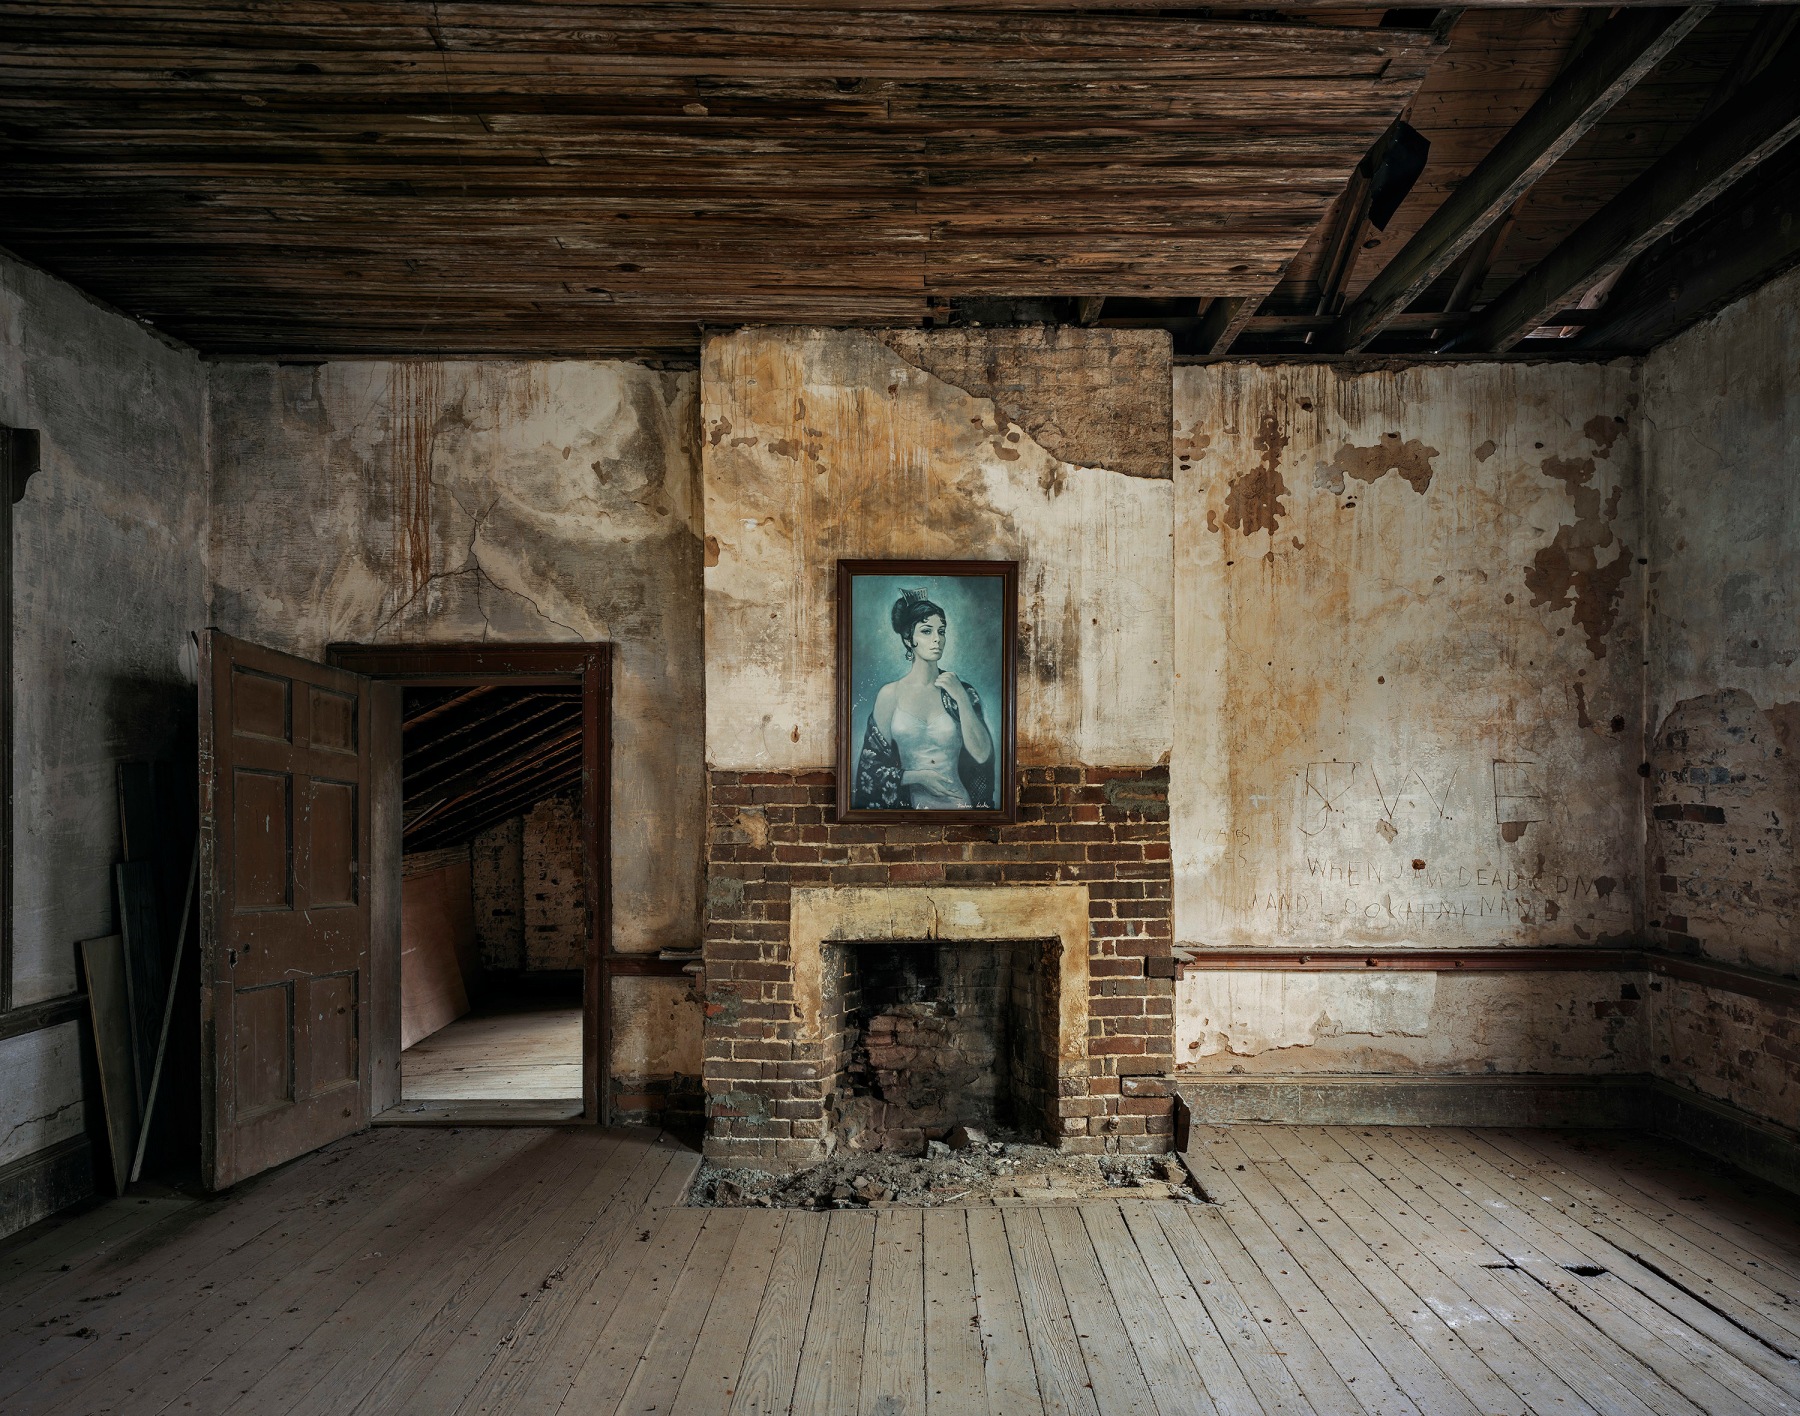 Andrew Moore,&nbsp;Carmen, Saunders Hall, Lawrence County, Alabama,&nbsp;2015. Archival pigment print, 50 x 60 inches.&nbsp;